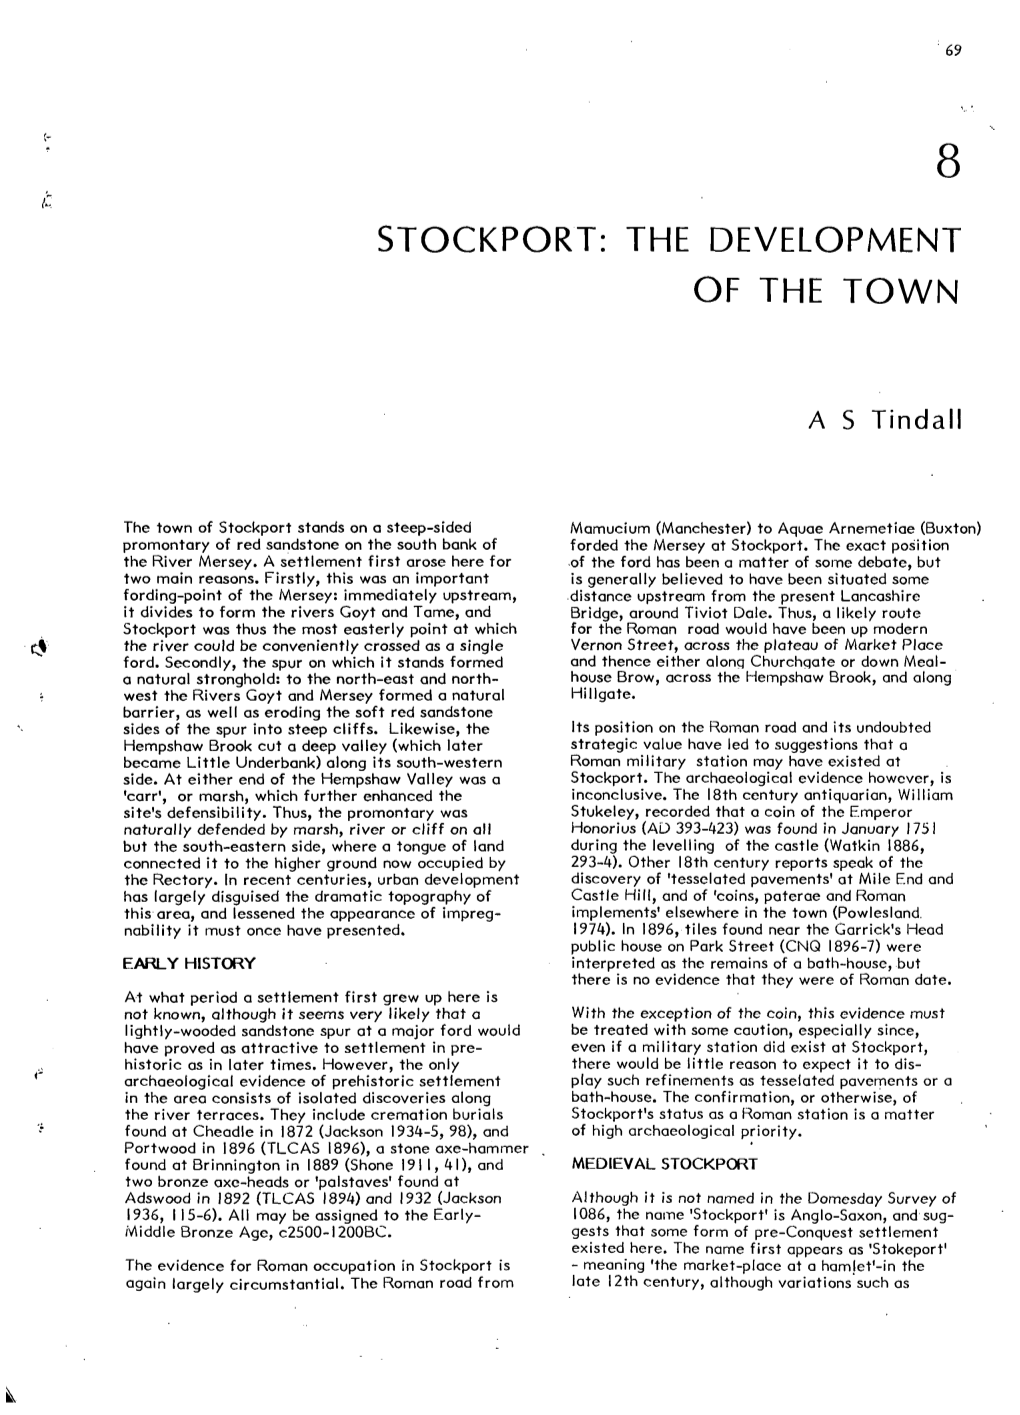 Stockport: the Development of the Town